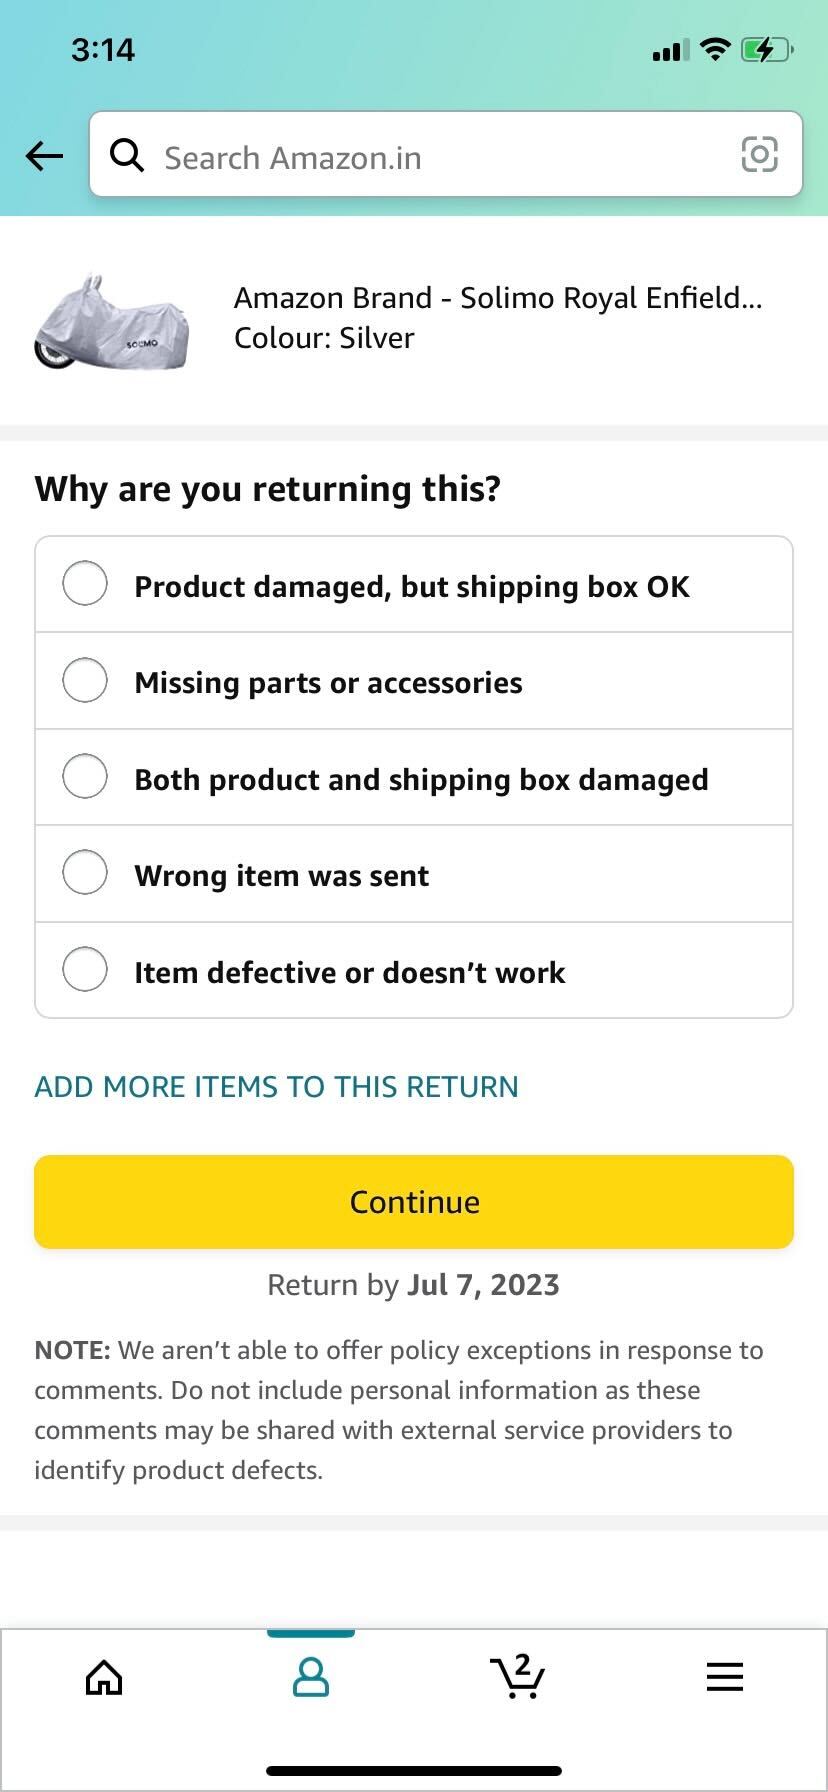 https://www.techjunkie.com/wp-content/uploads/2020/04/Amazon-Add-More-Items-To-This-Return-button.jpg